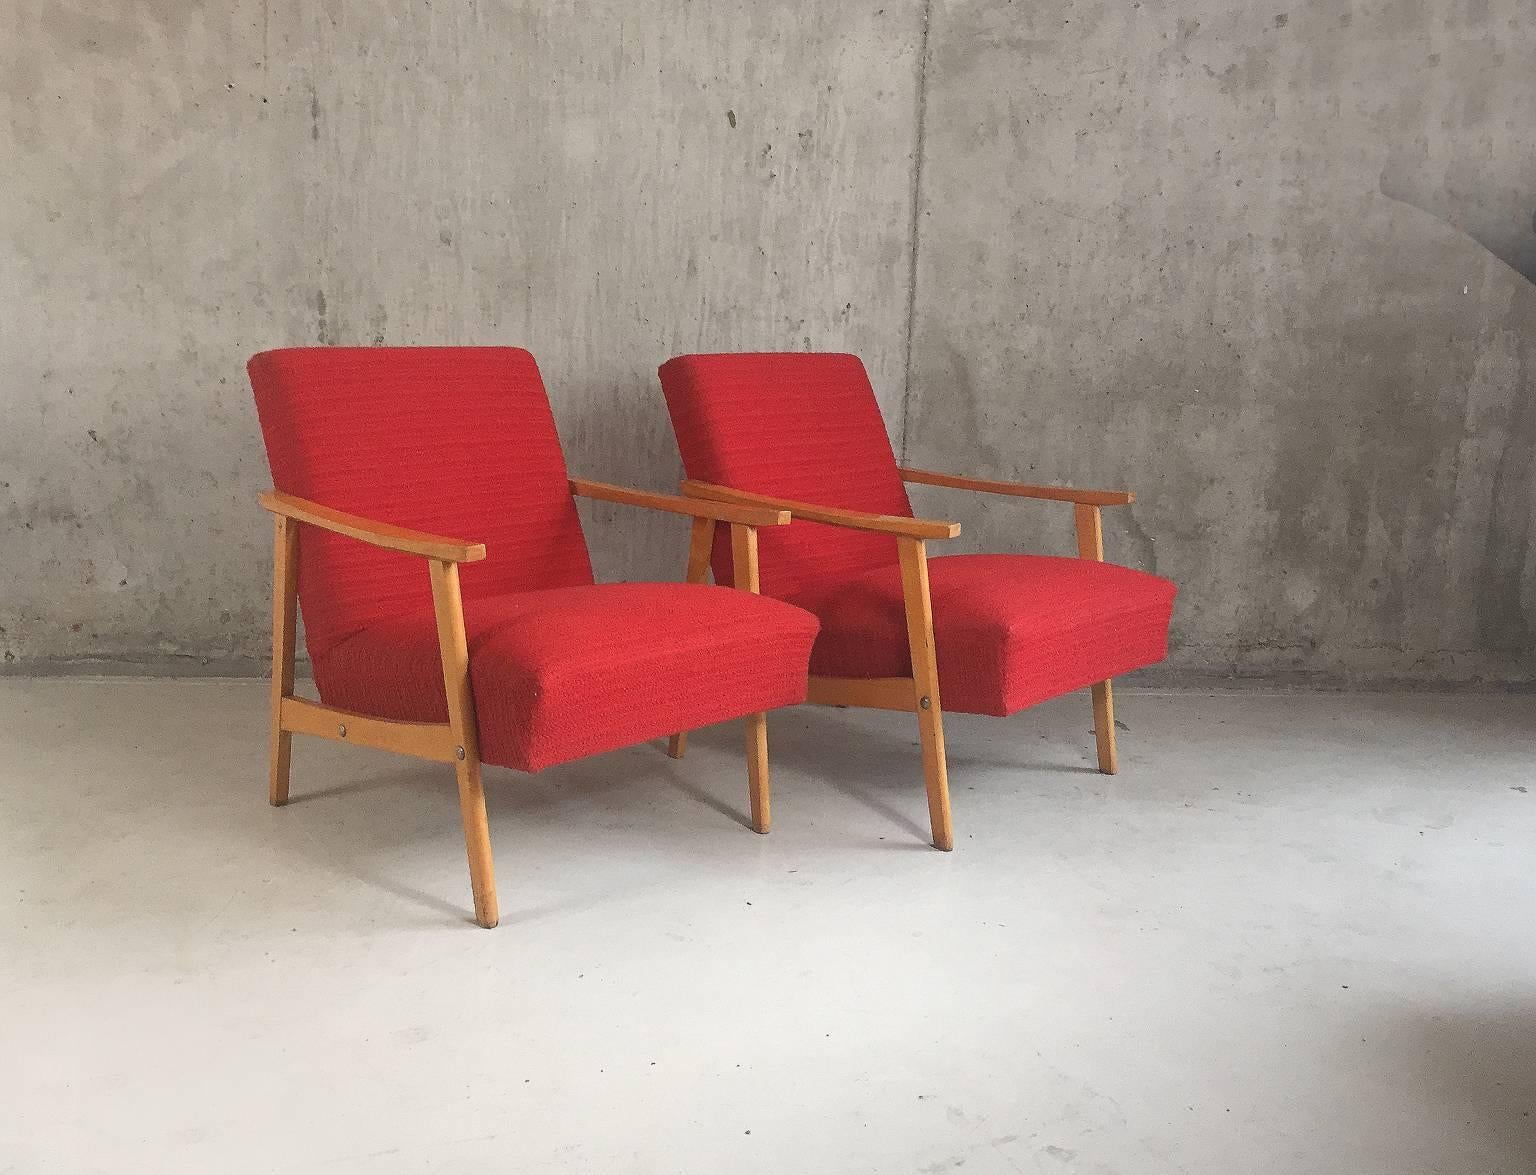 Late 20th Century Pair of 1970s Czech Lounge Chairs with Bright Red Original Upholstery and Beech